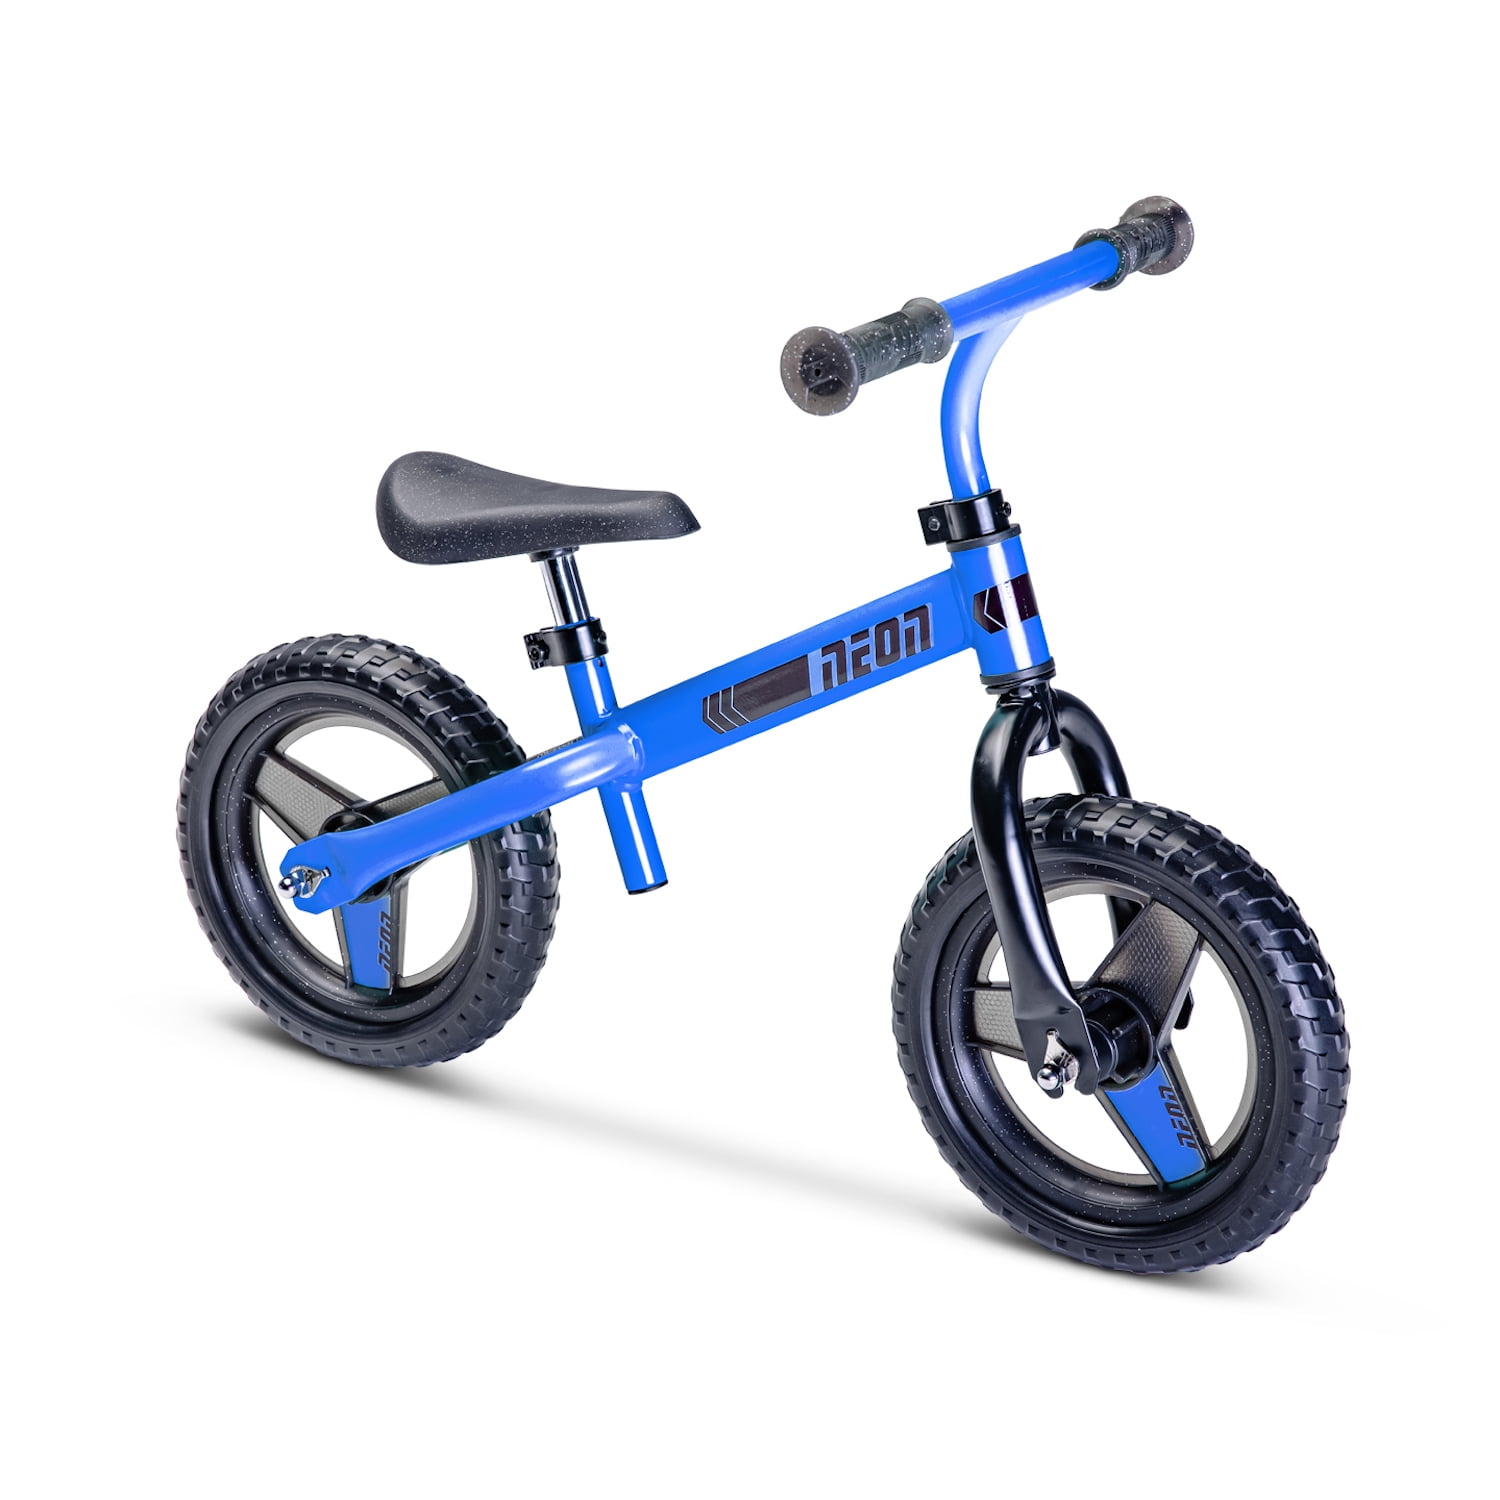 Training Learning Bicycle for Boys Girls Blue Baby Balance Bike Perfect as a Kids Running Bike 